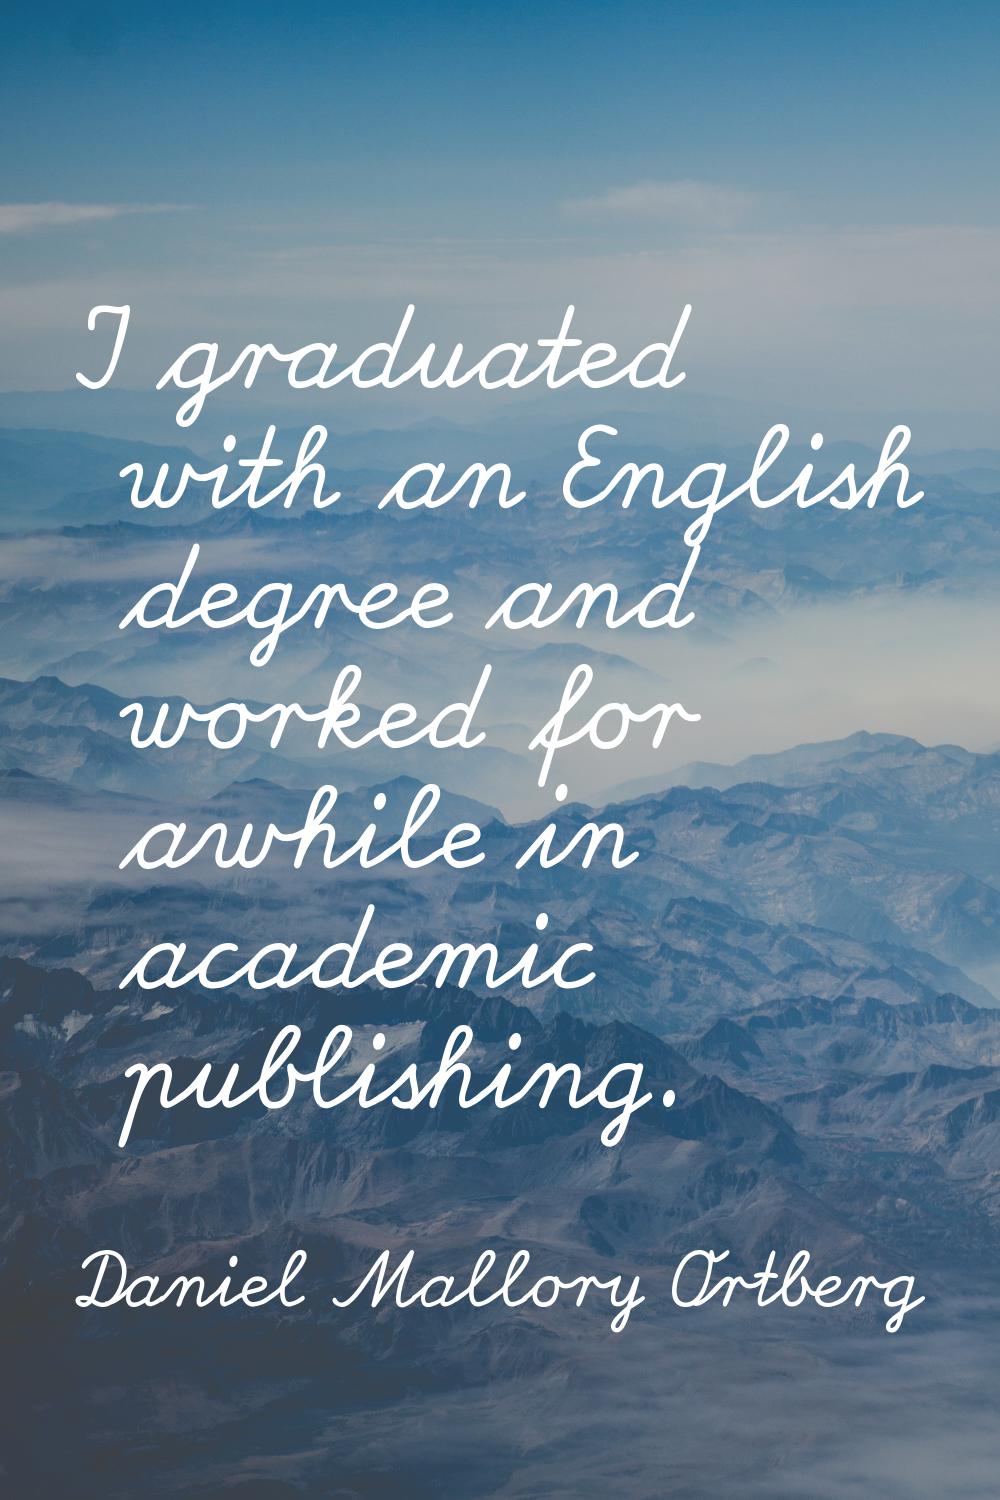 I graduated with an English degree and worked for awhile in academic publishing.